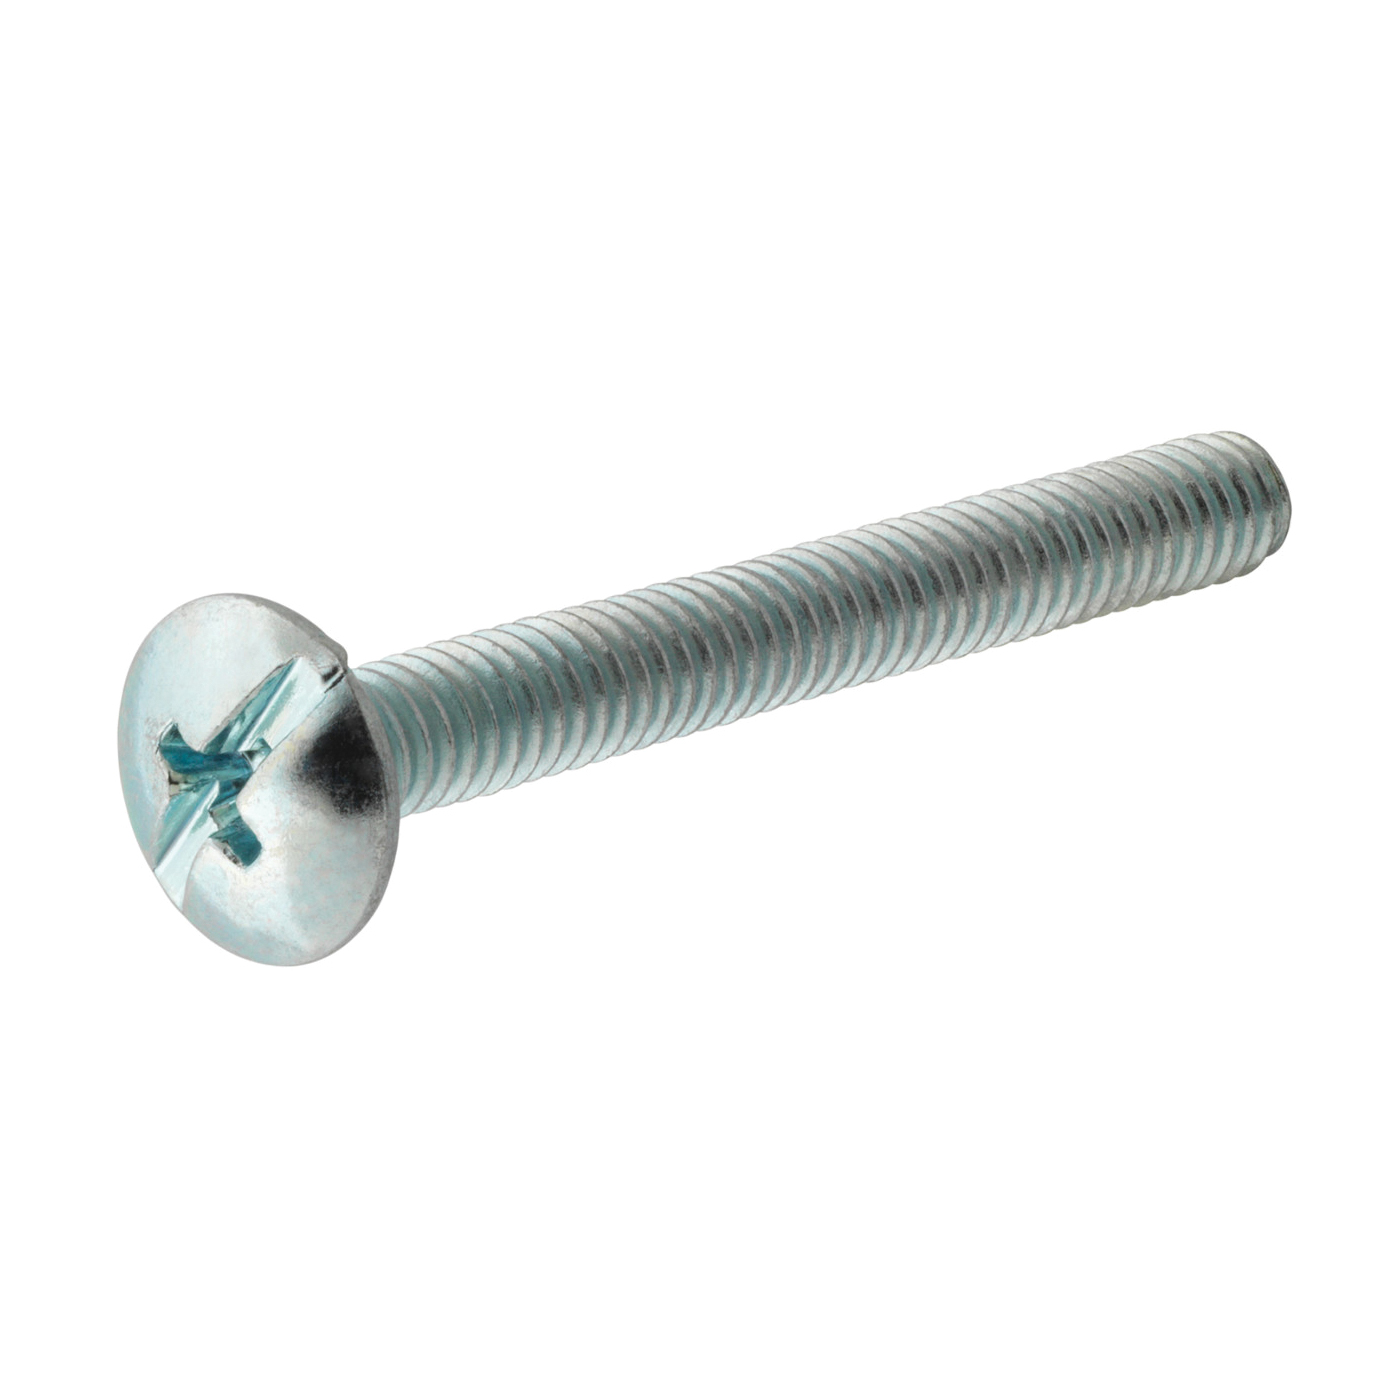 881047 Machine Screw, #8-32 Thread, 1-1/4 in L, Truss Head, Phillips, Slotted Drive, Stainless Steel